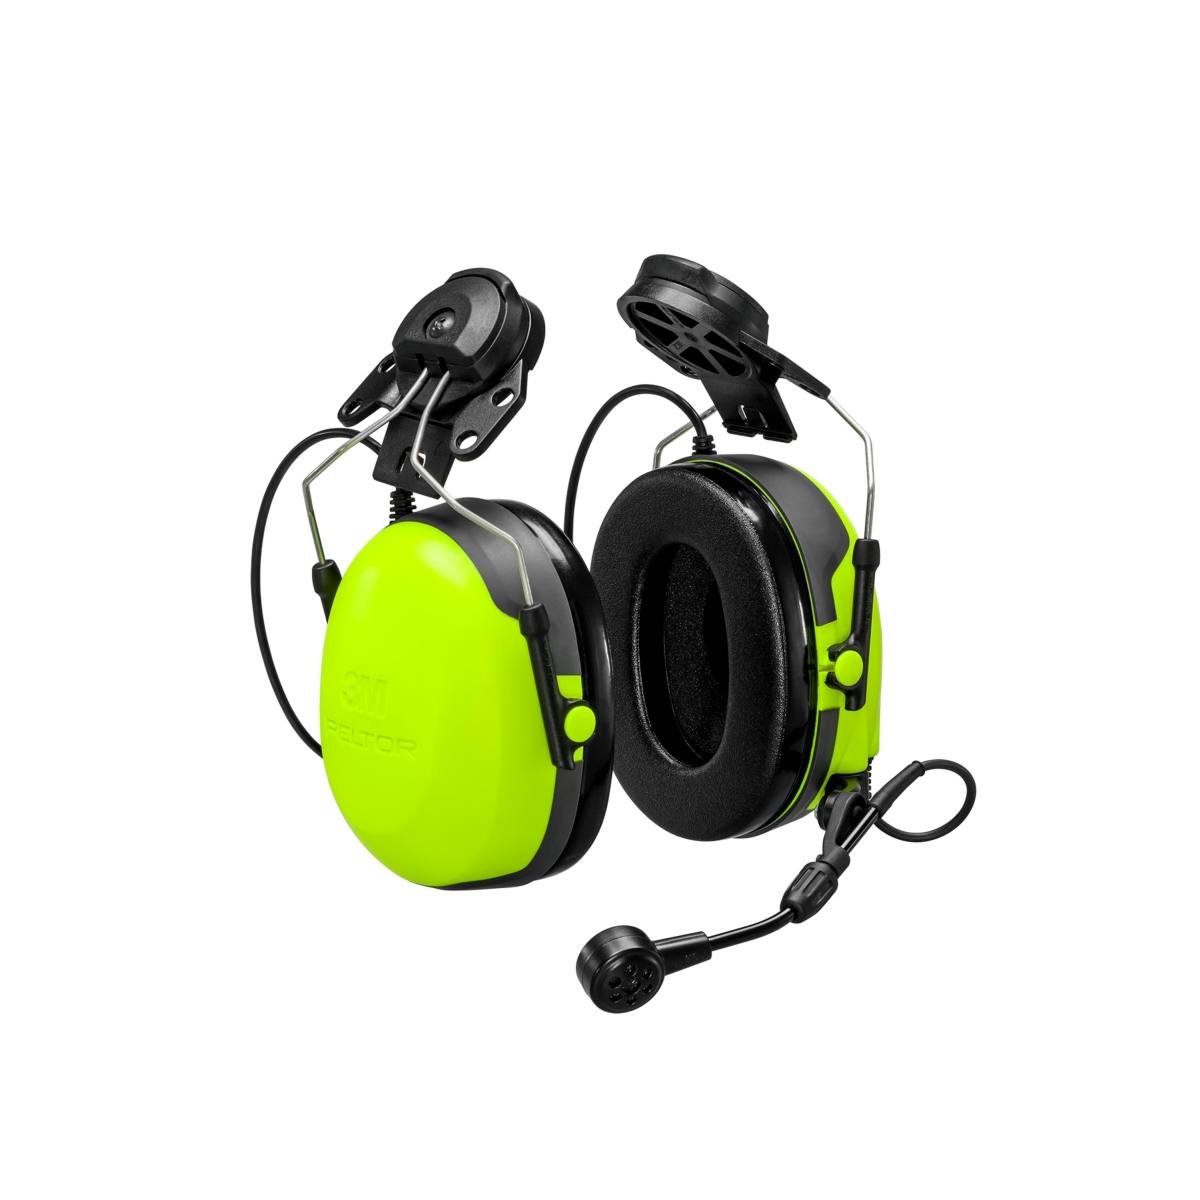 3M PELTOR CH-3 Hearing protection headset with PTT, helmet attachment, yellow, MT74H52P3E-111